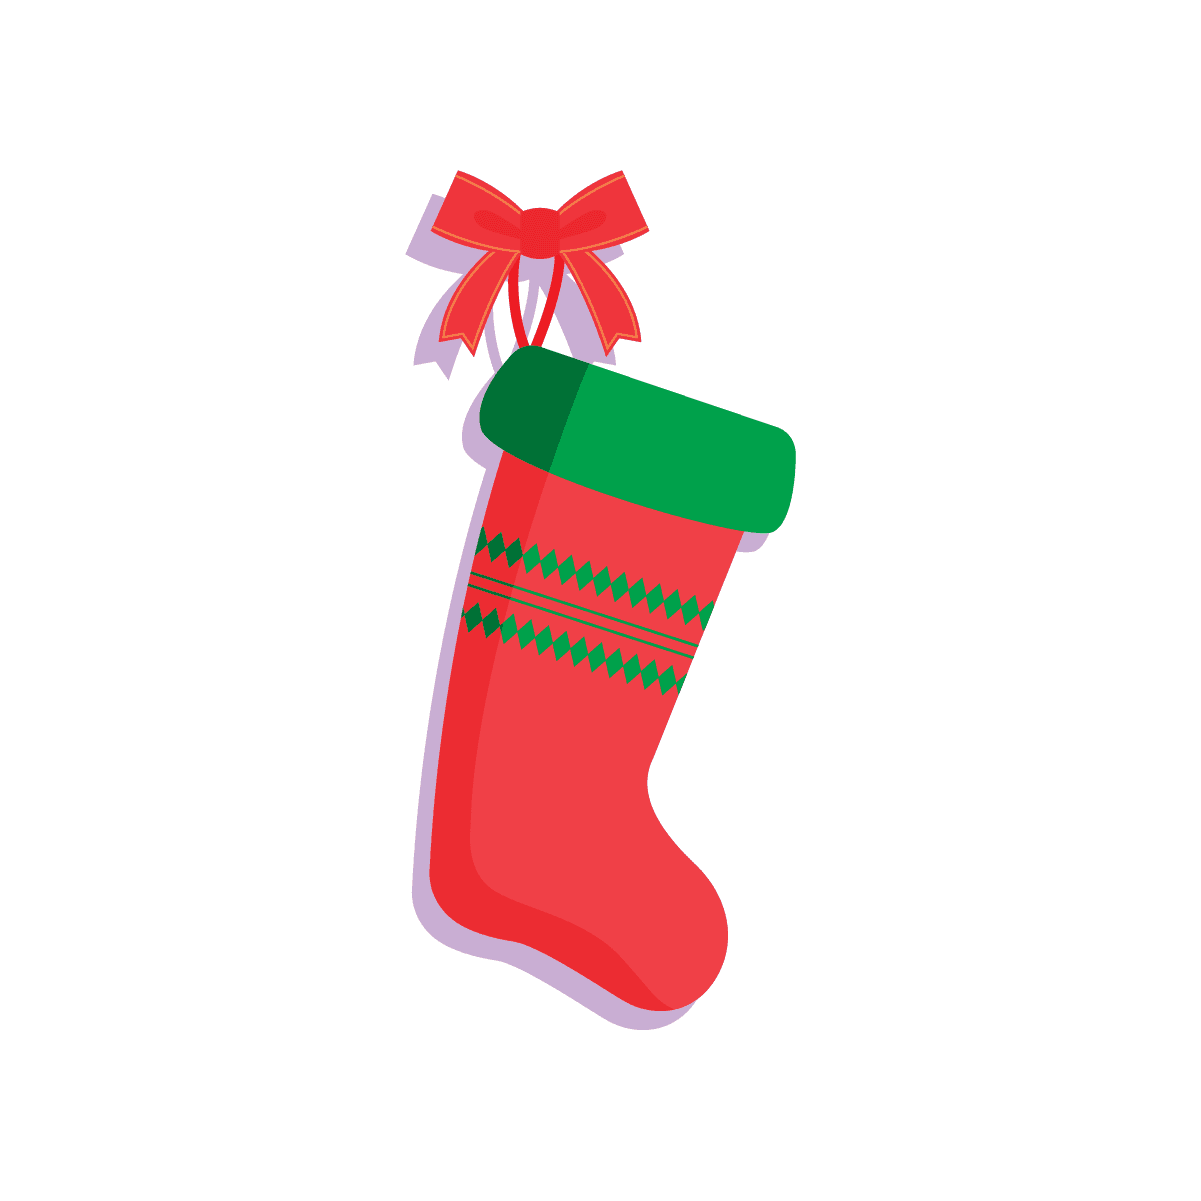 Festive red Christmas stocking with glittery snowflake